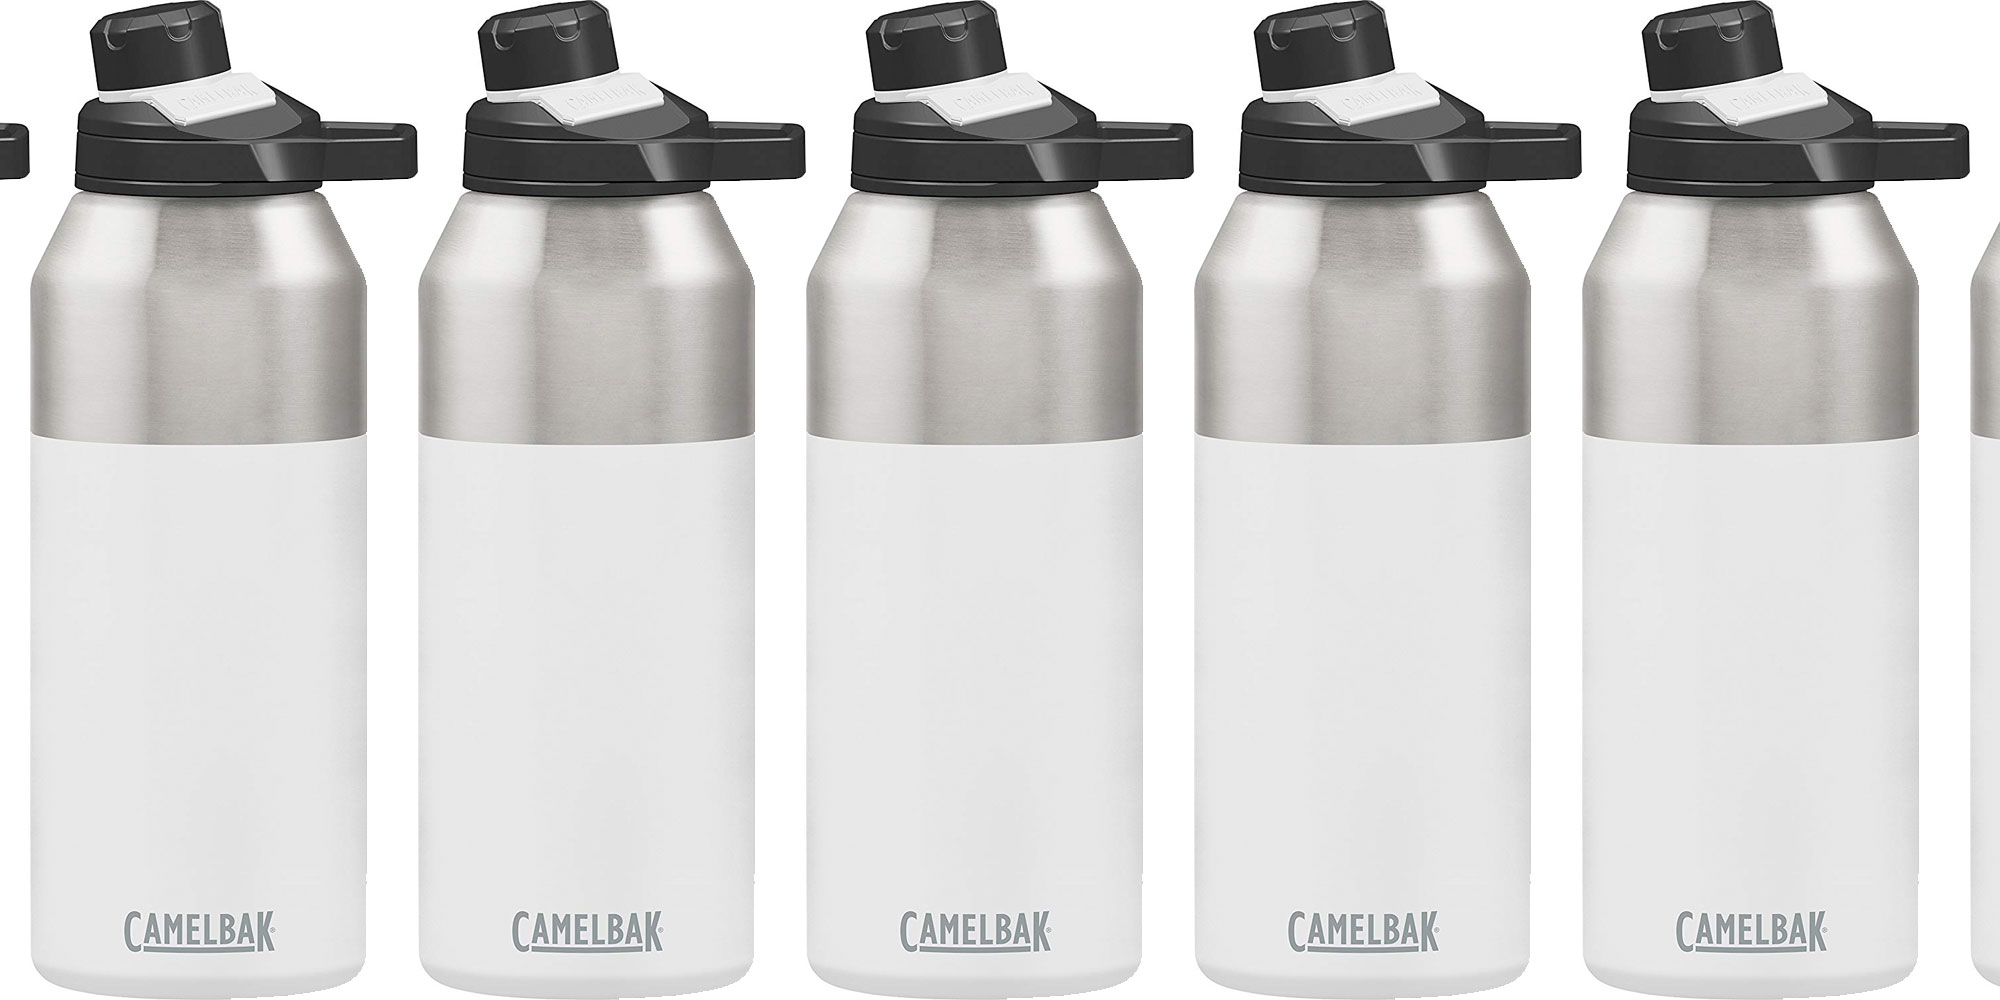 Camelbak Insulated Bottle - Keep Your Drinks Cold or Hot